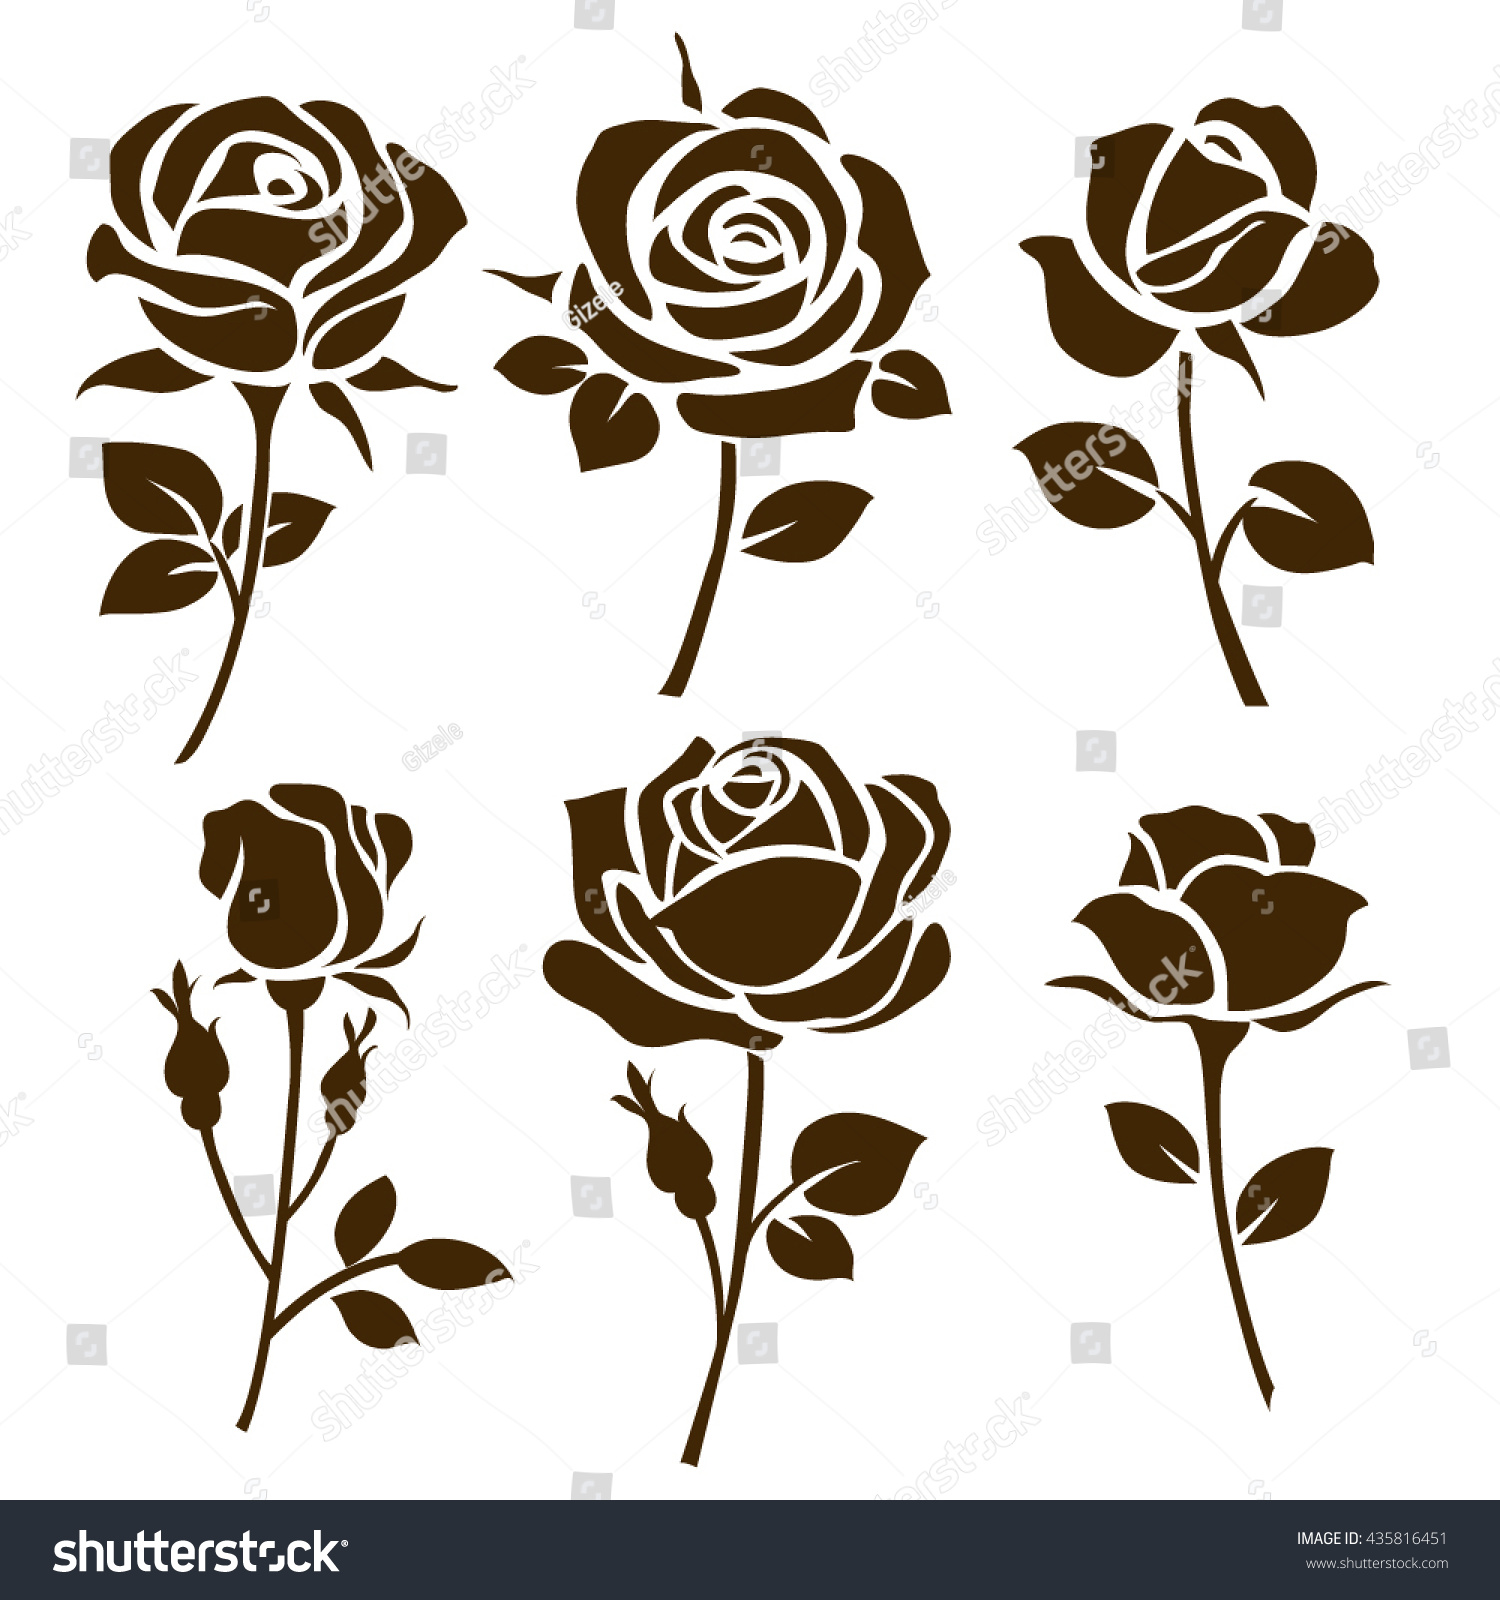  Flower icon. Set of decorative rose silhouettes. Vector rose #435816451